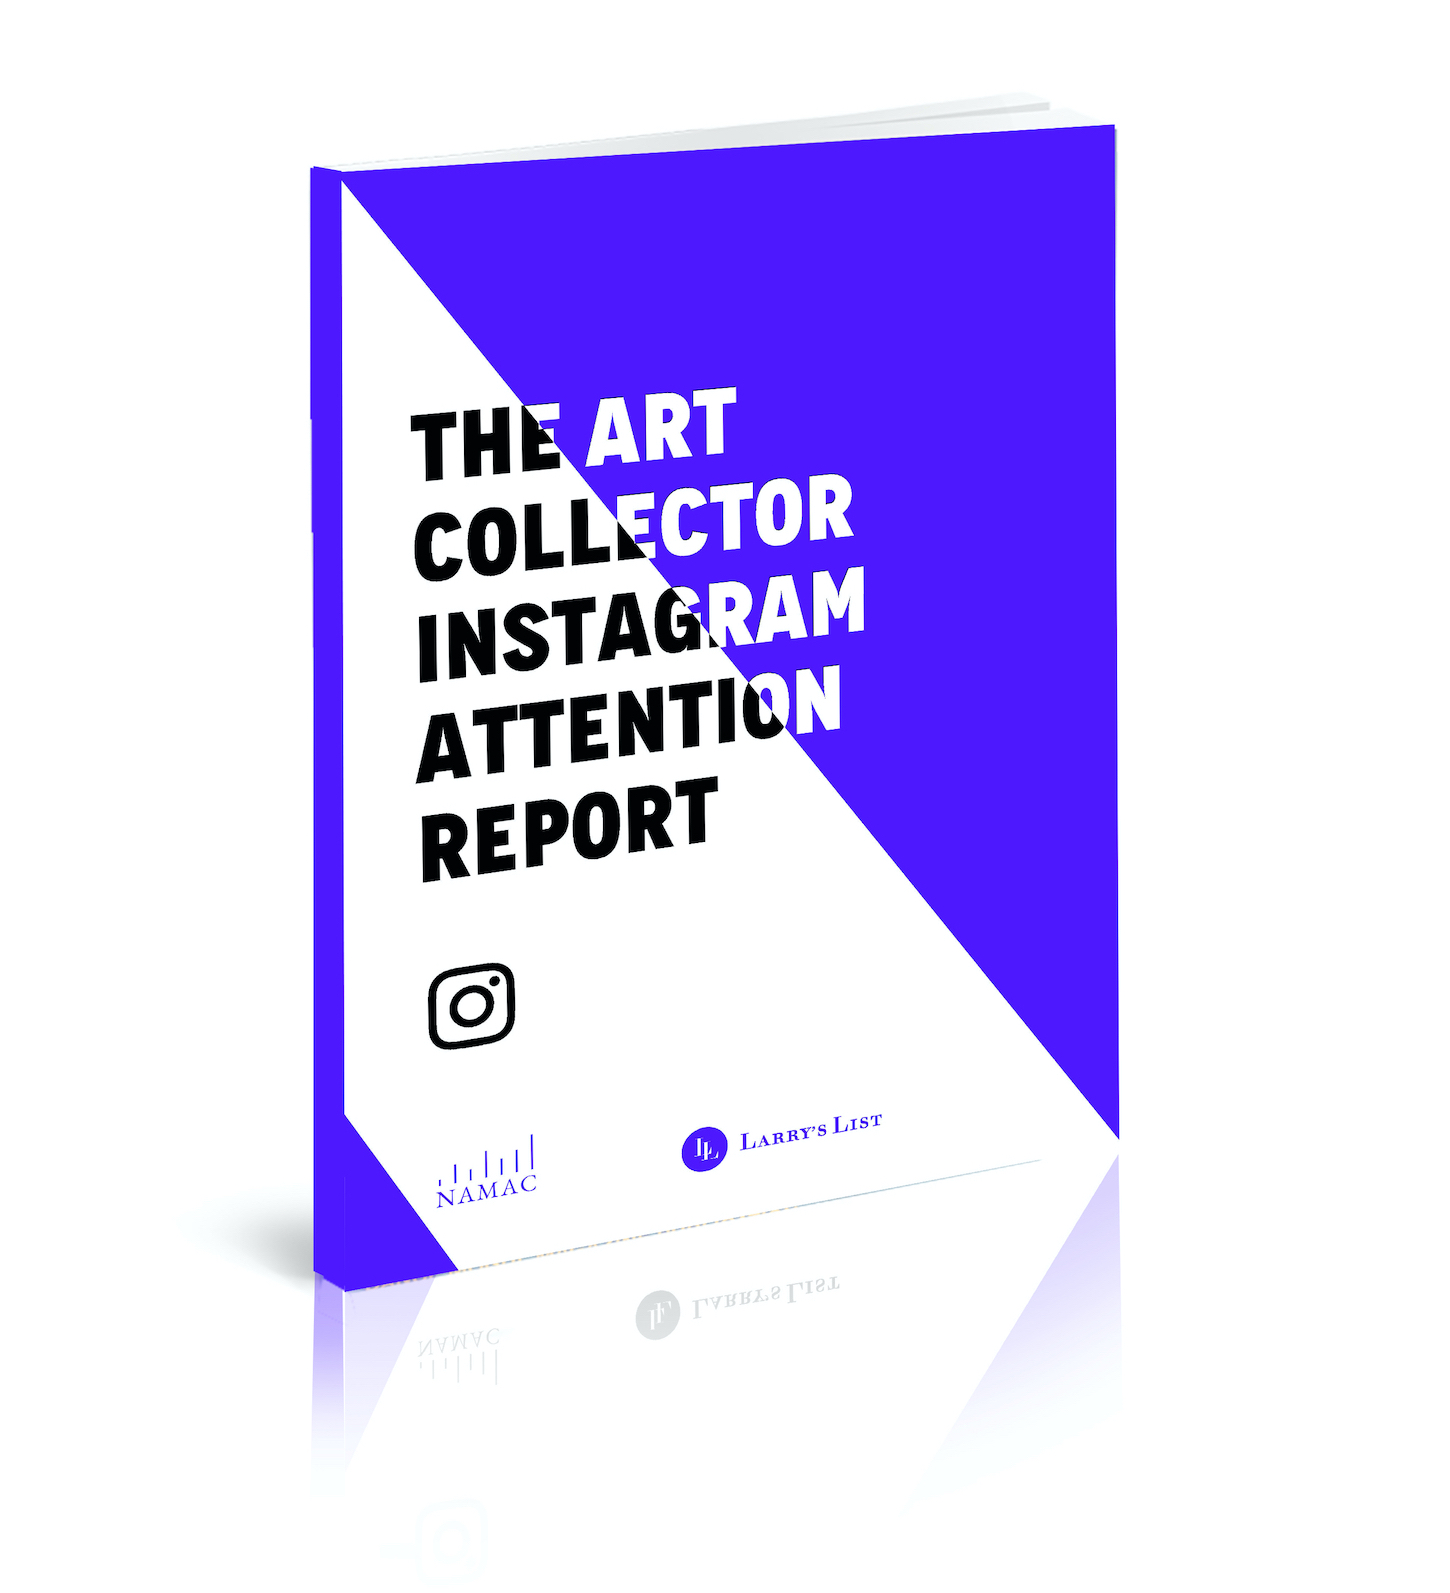 The Art Collector IG Attention Report